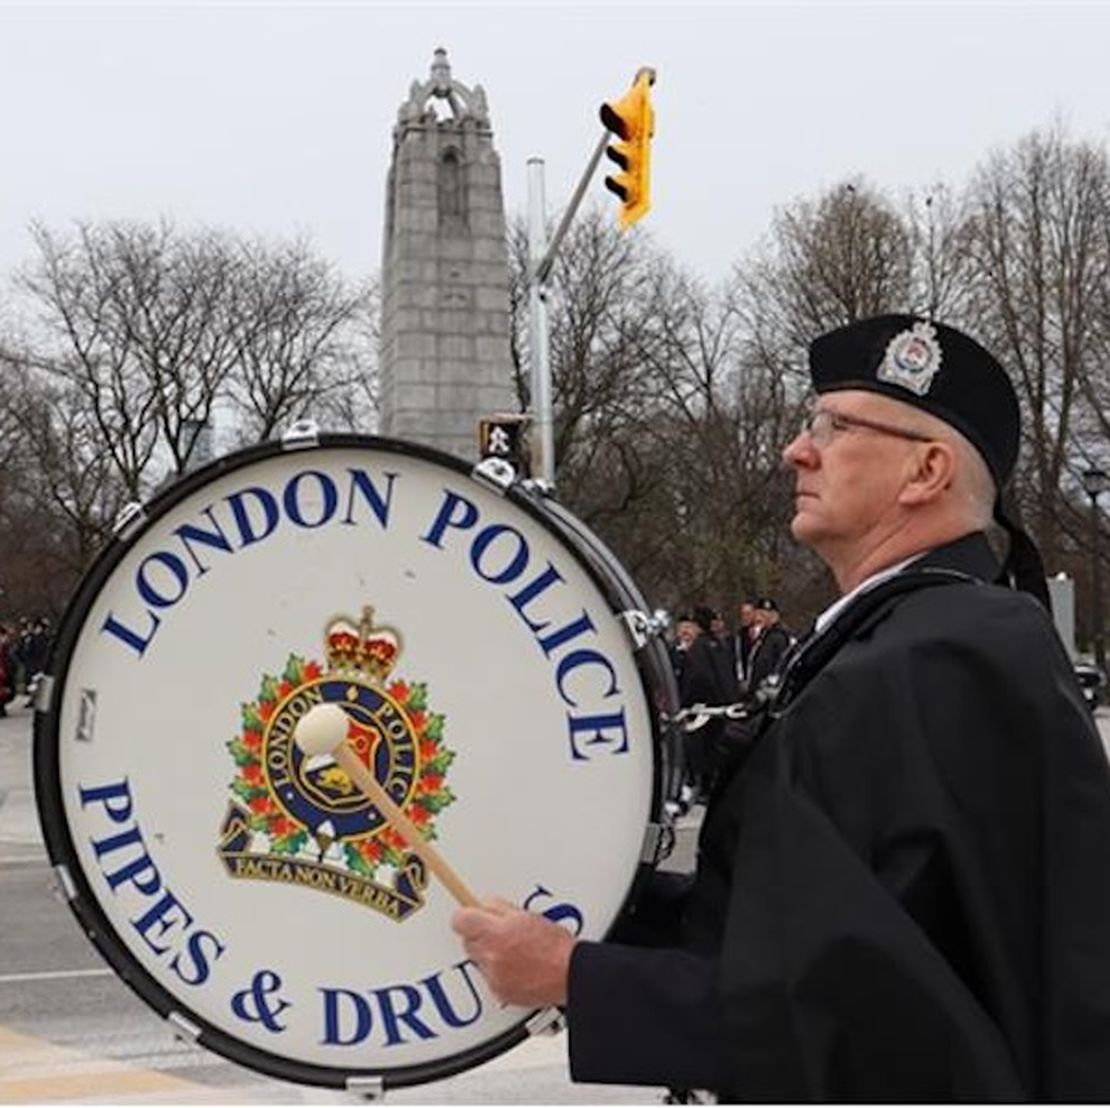 London Police Pipe Band